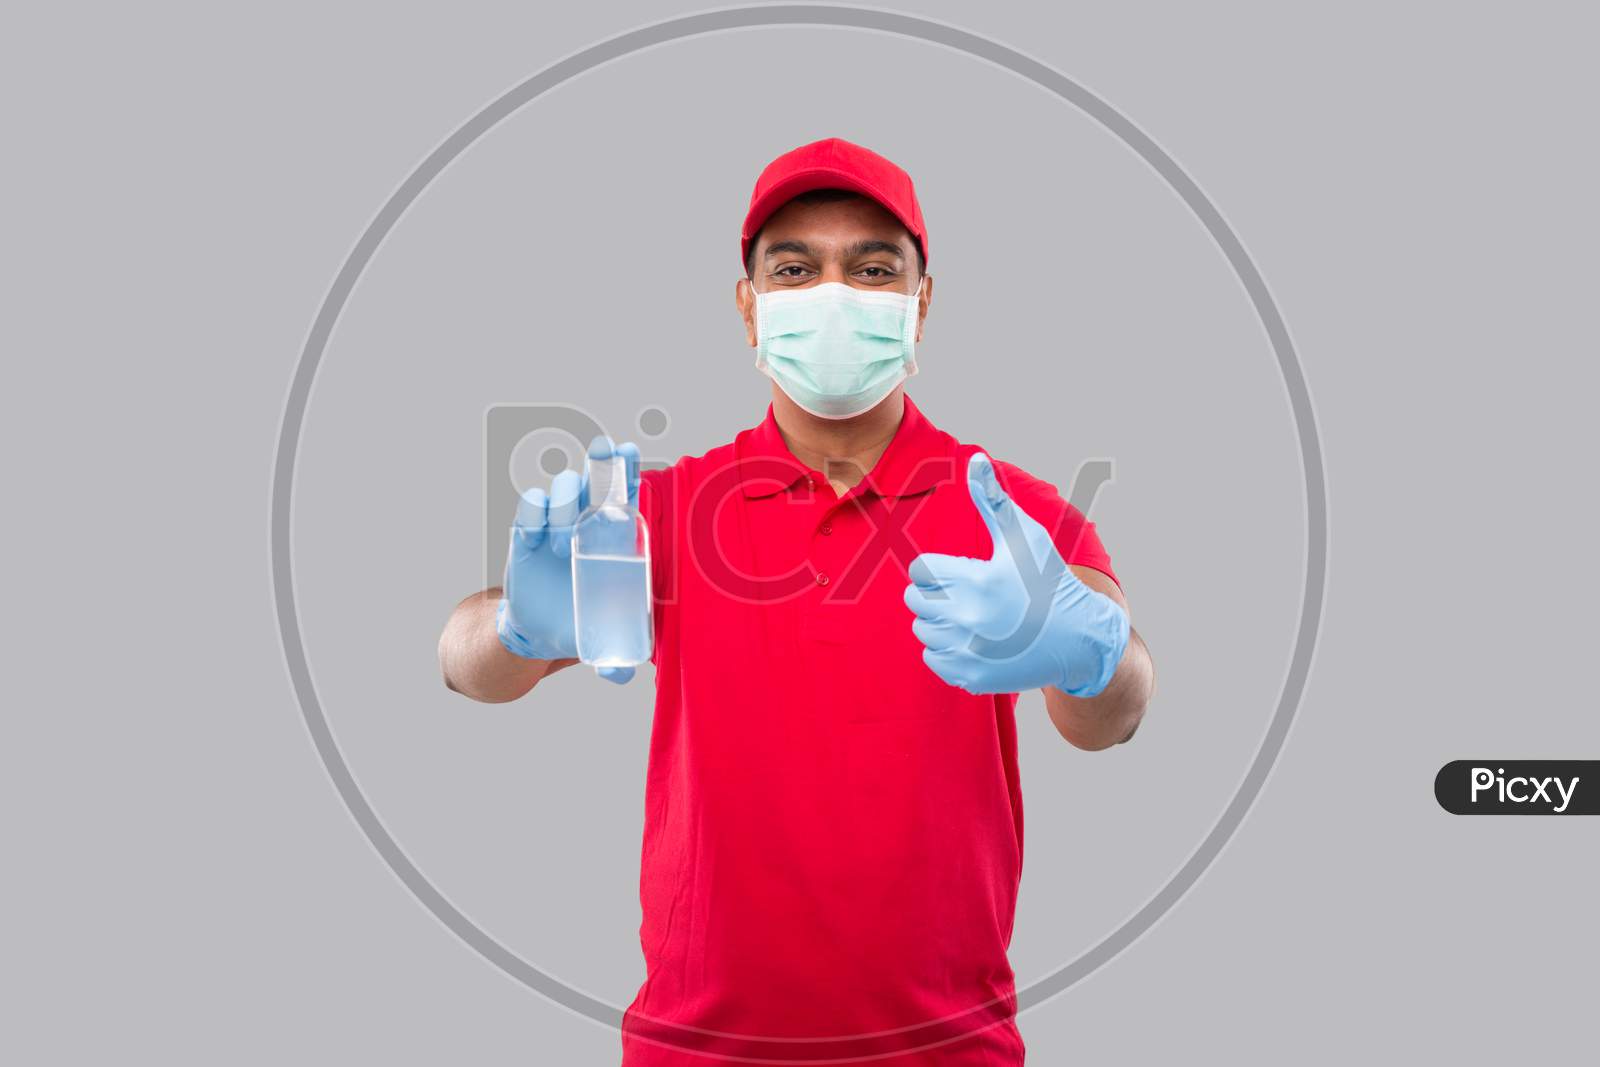 Delivery Man Showing Hands Sanitizer And Thumb Up Wearing Medical Mask And Gloves Isolated. Indian Delivery Boy Holding Hand Antiseptic